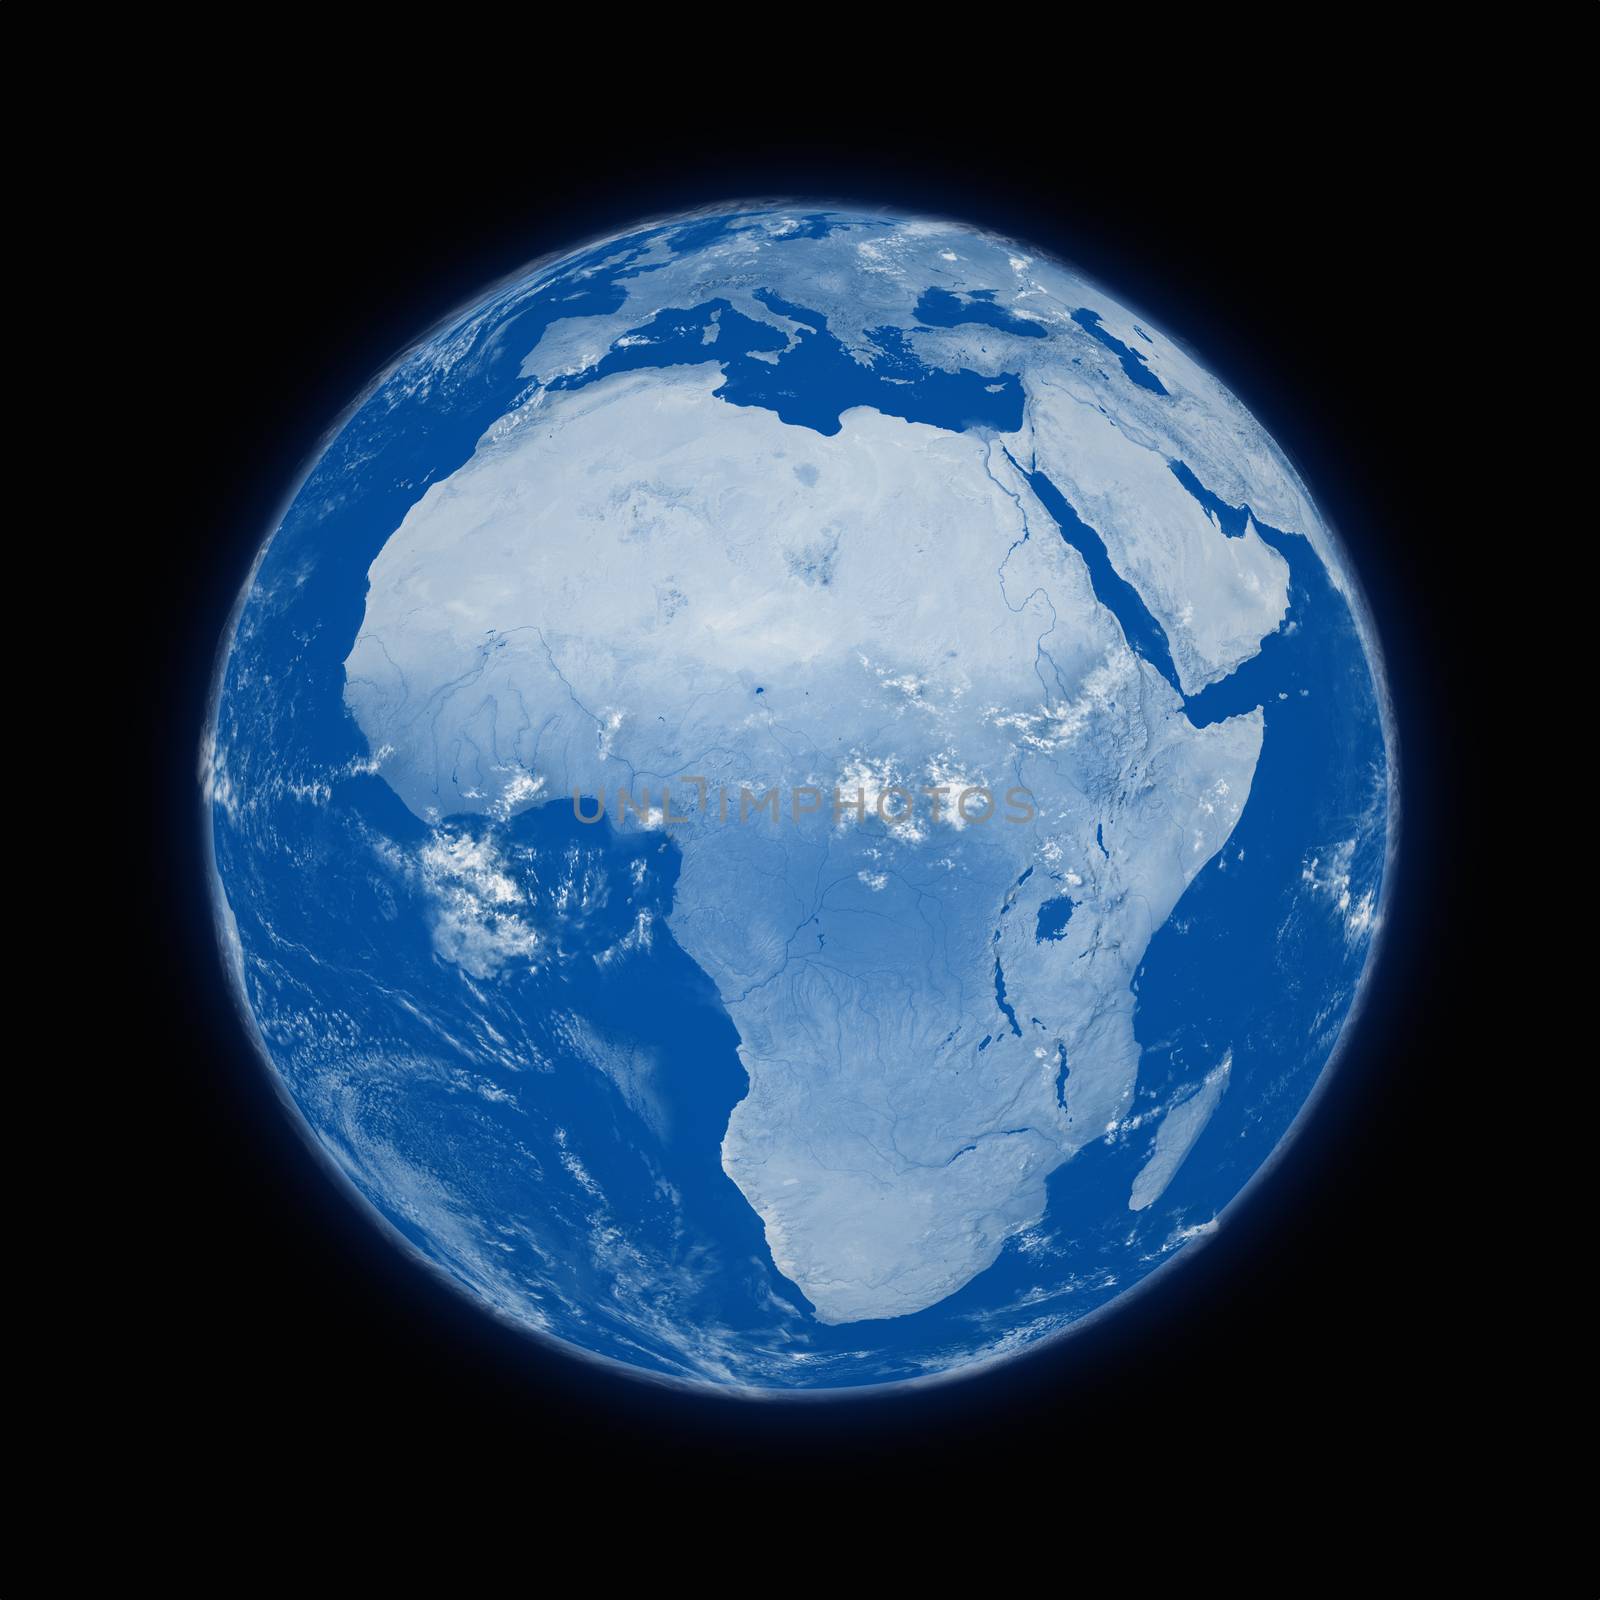 Africa on planet Earth by Harvepino